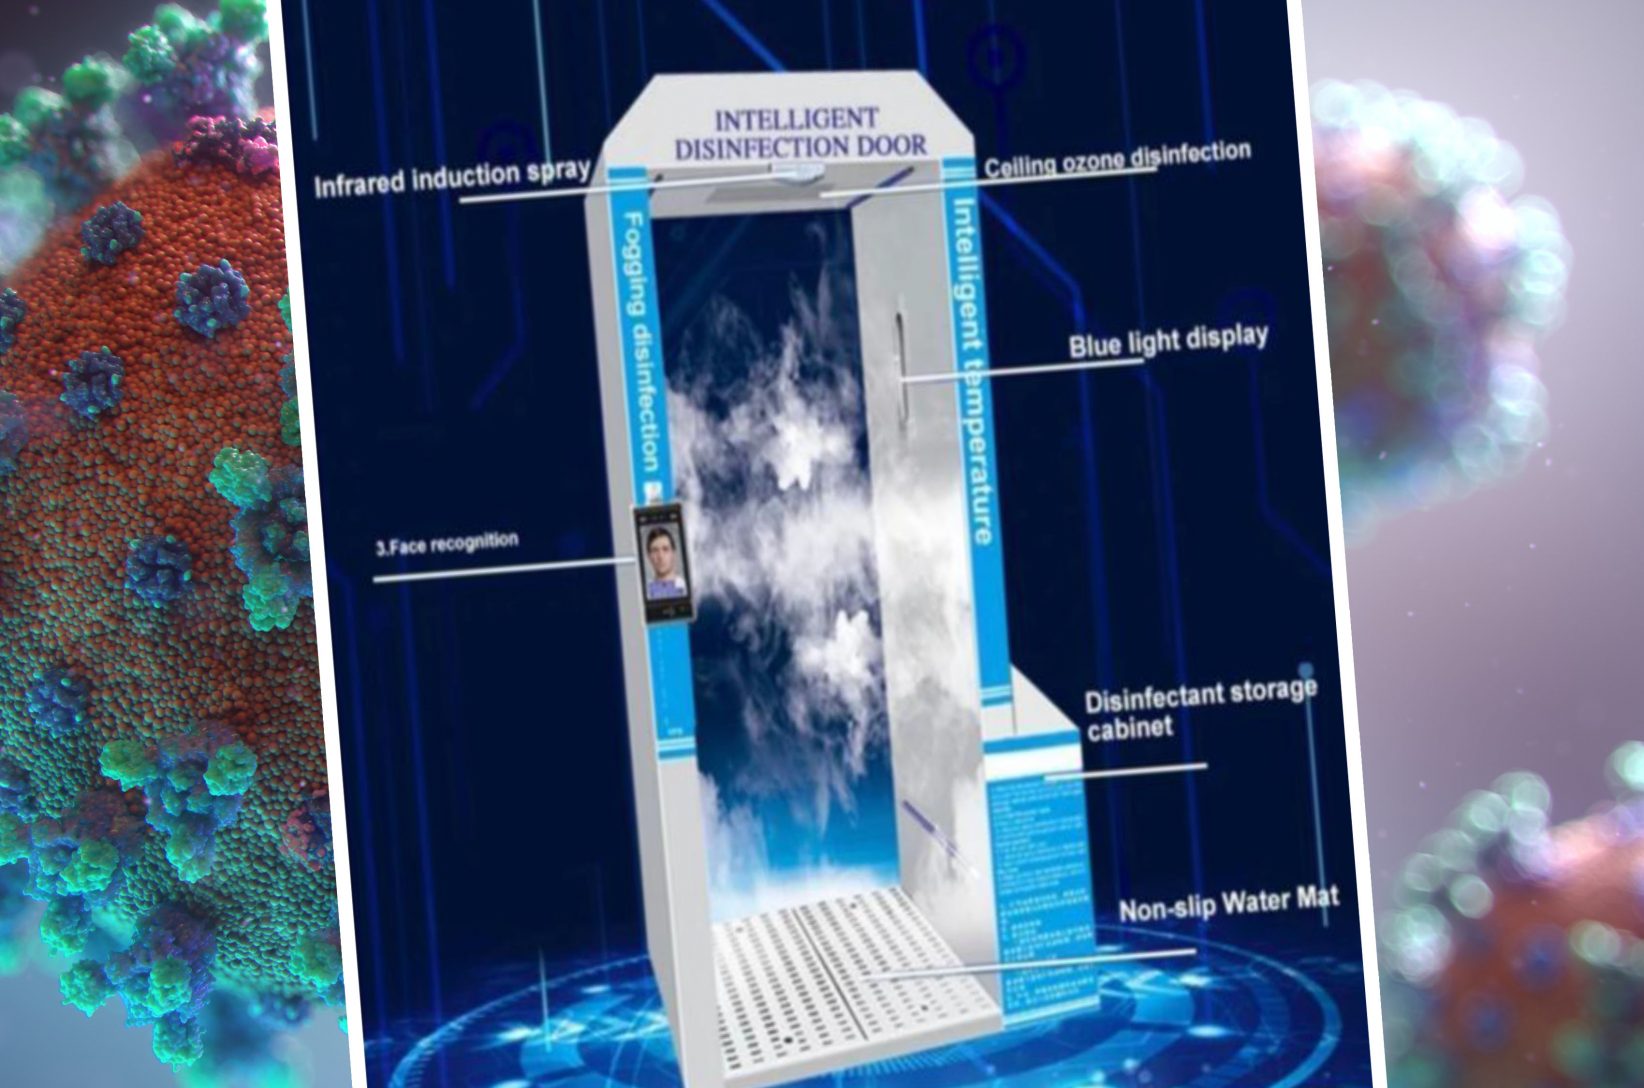 Smart doorway could detect high temp, neutralize COVID on clothing, KC tech pioneer says